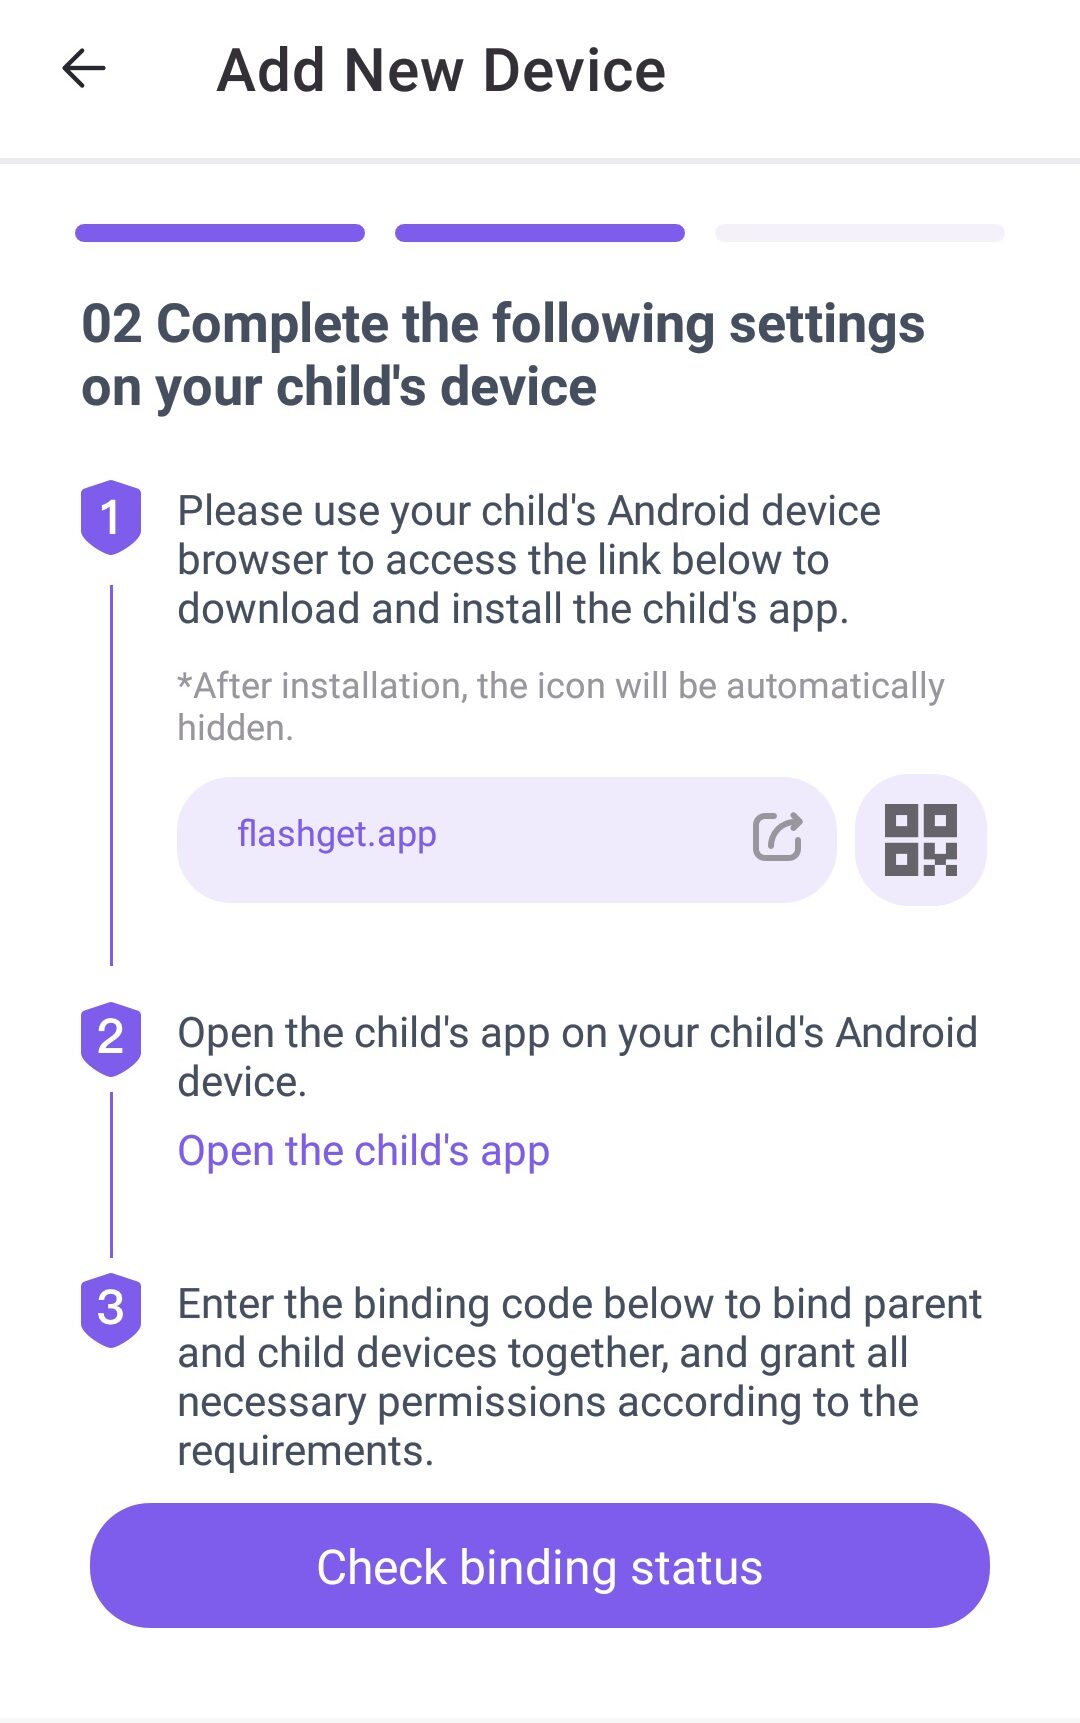 Add new device on the parent's device